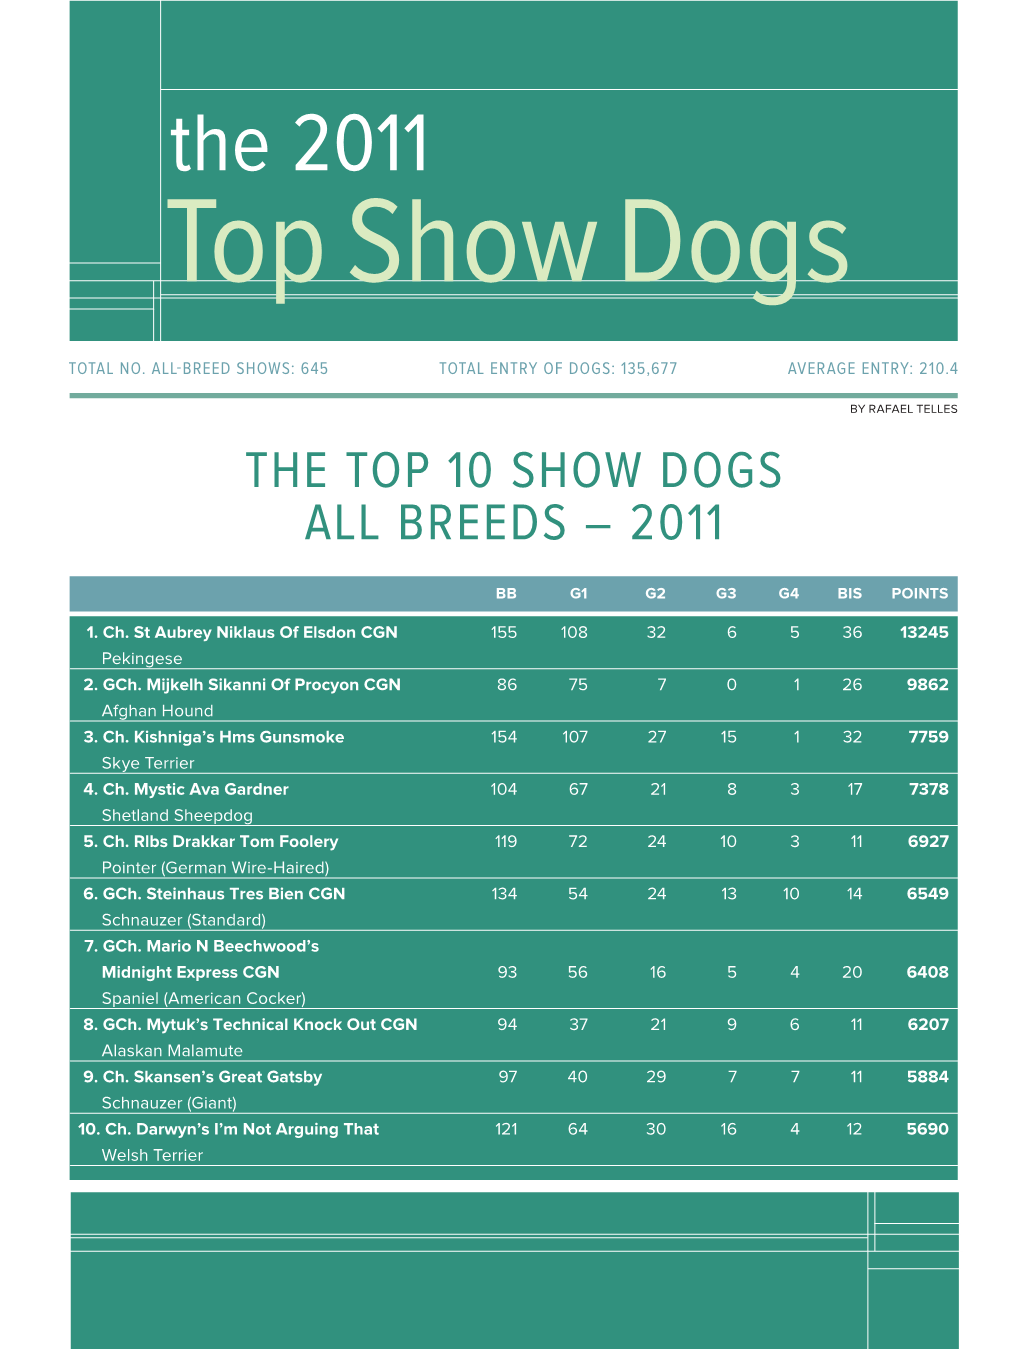 The 2011 Top Show Dogs